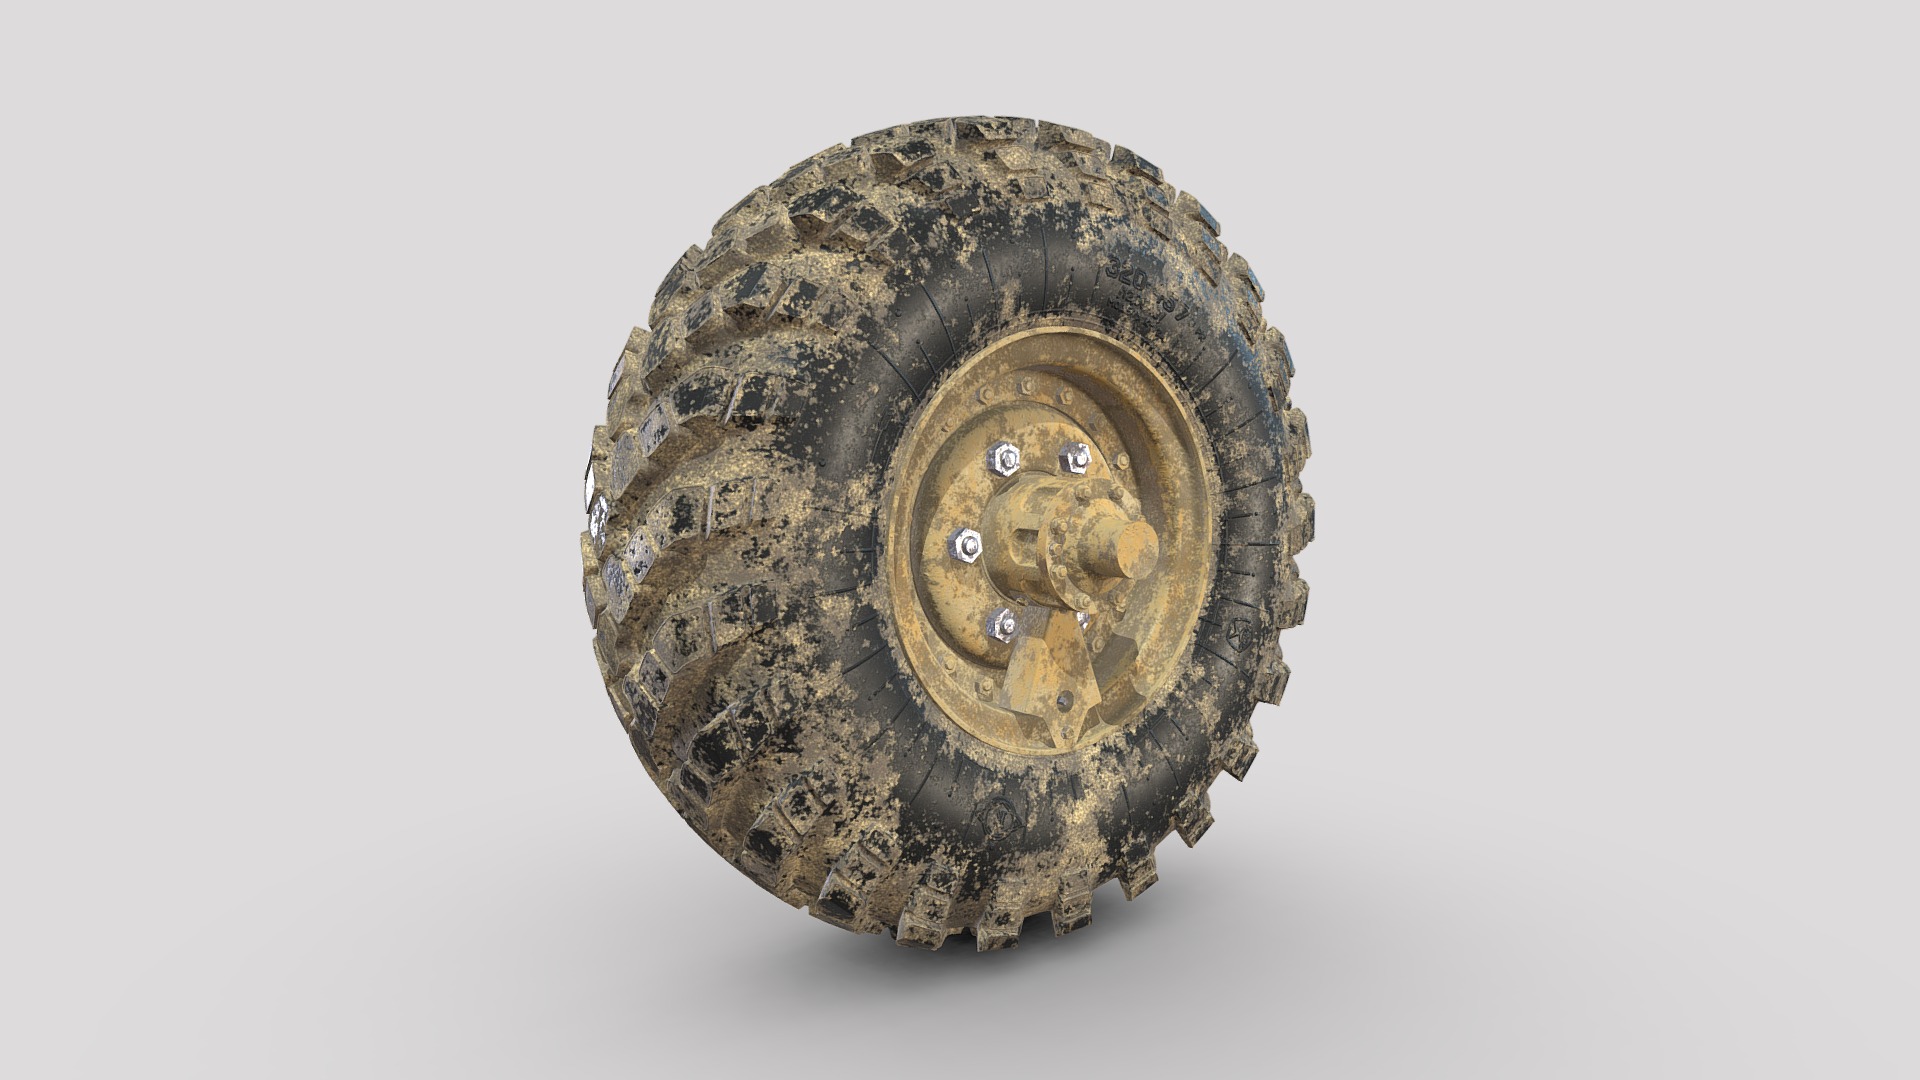 3D model ZIL-157-Tire+Disc_v3_Very dirty - This is a 3D model of the ZIL-157-Tire+Disc_v3_Very dirty. The 3D model is about a circular object with a hole in it.